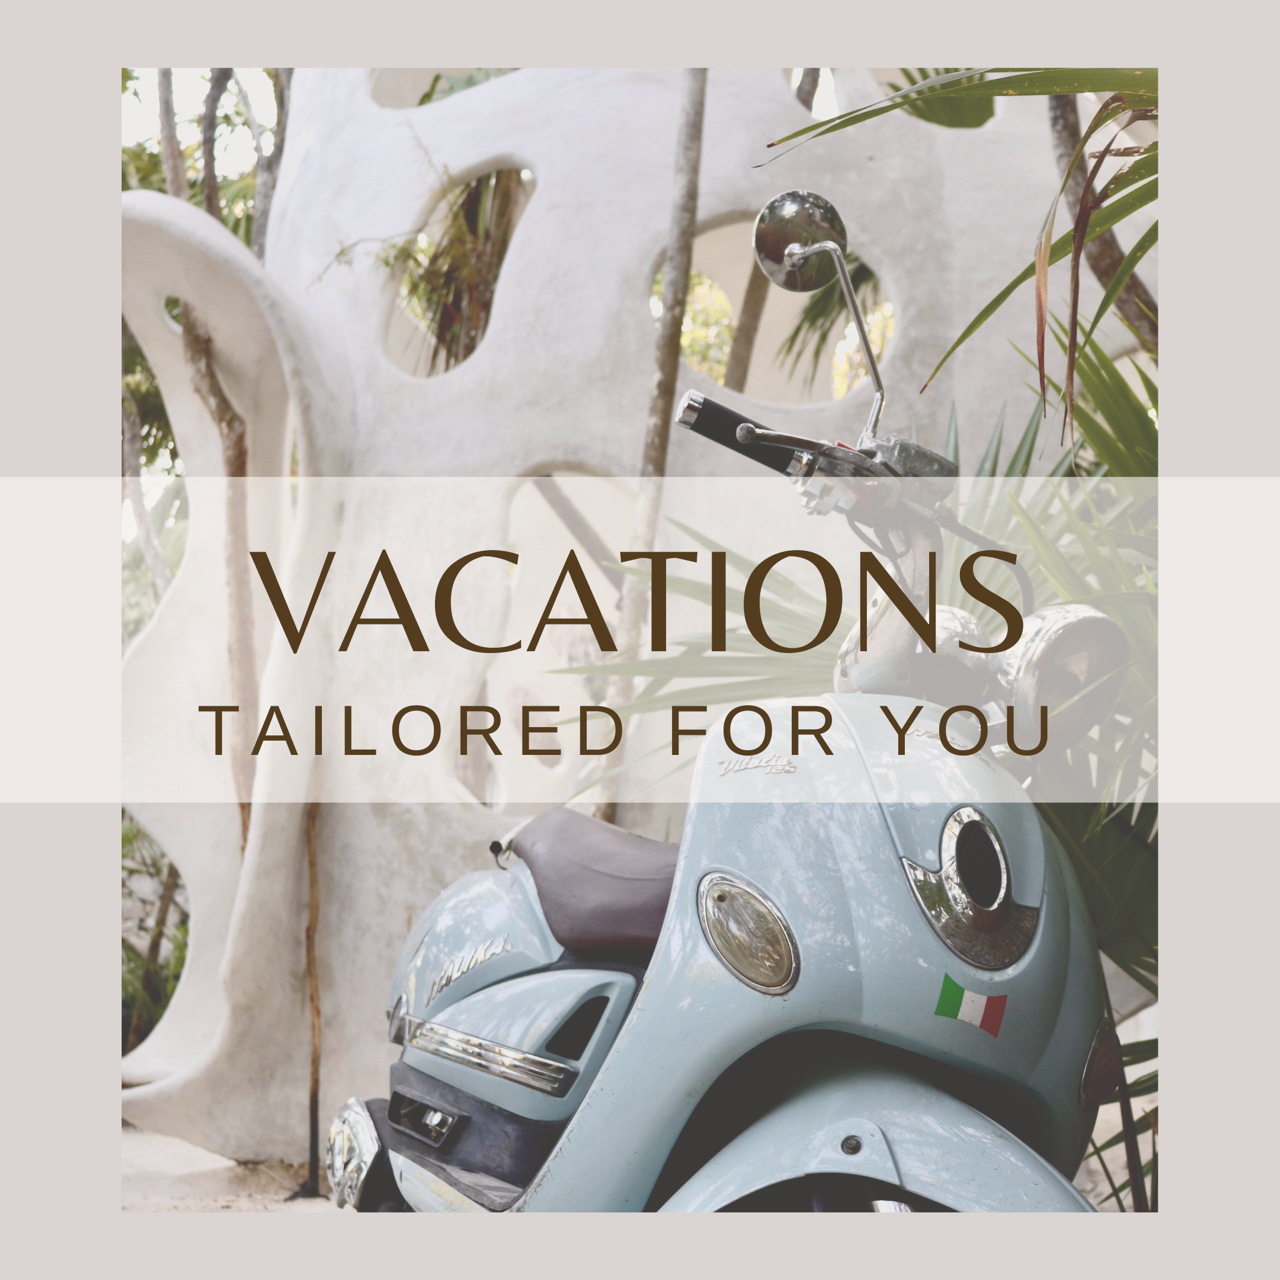 Vacations Tailored For You